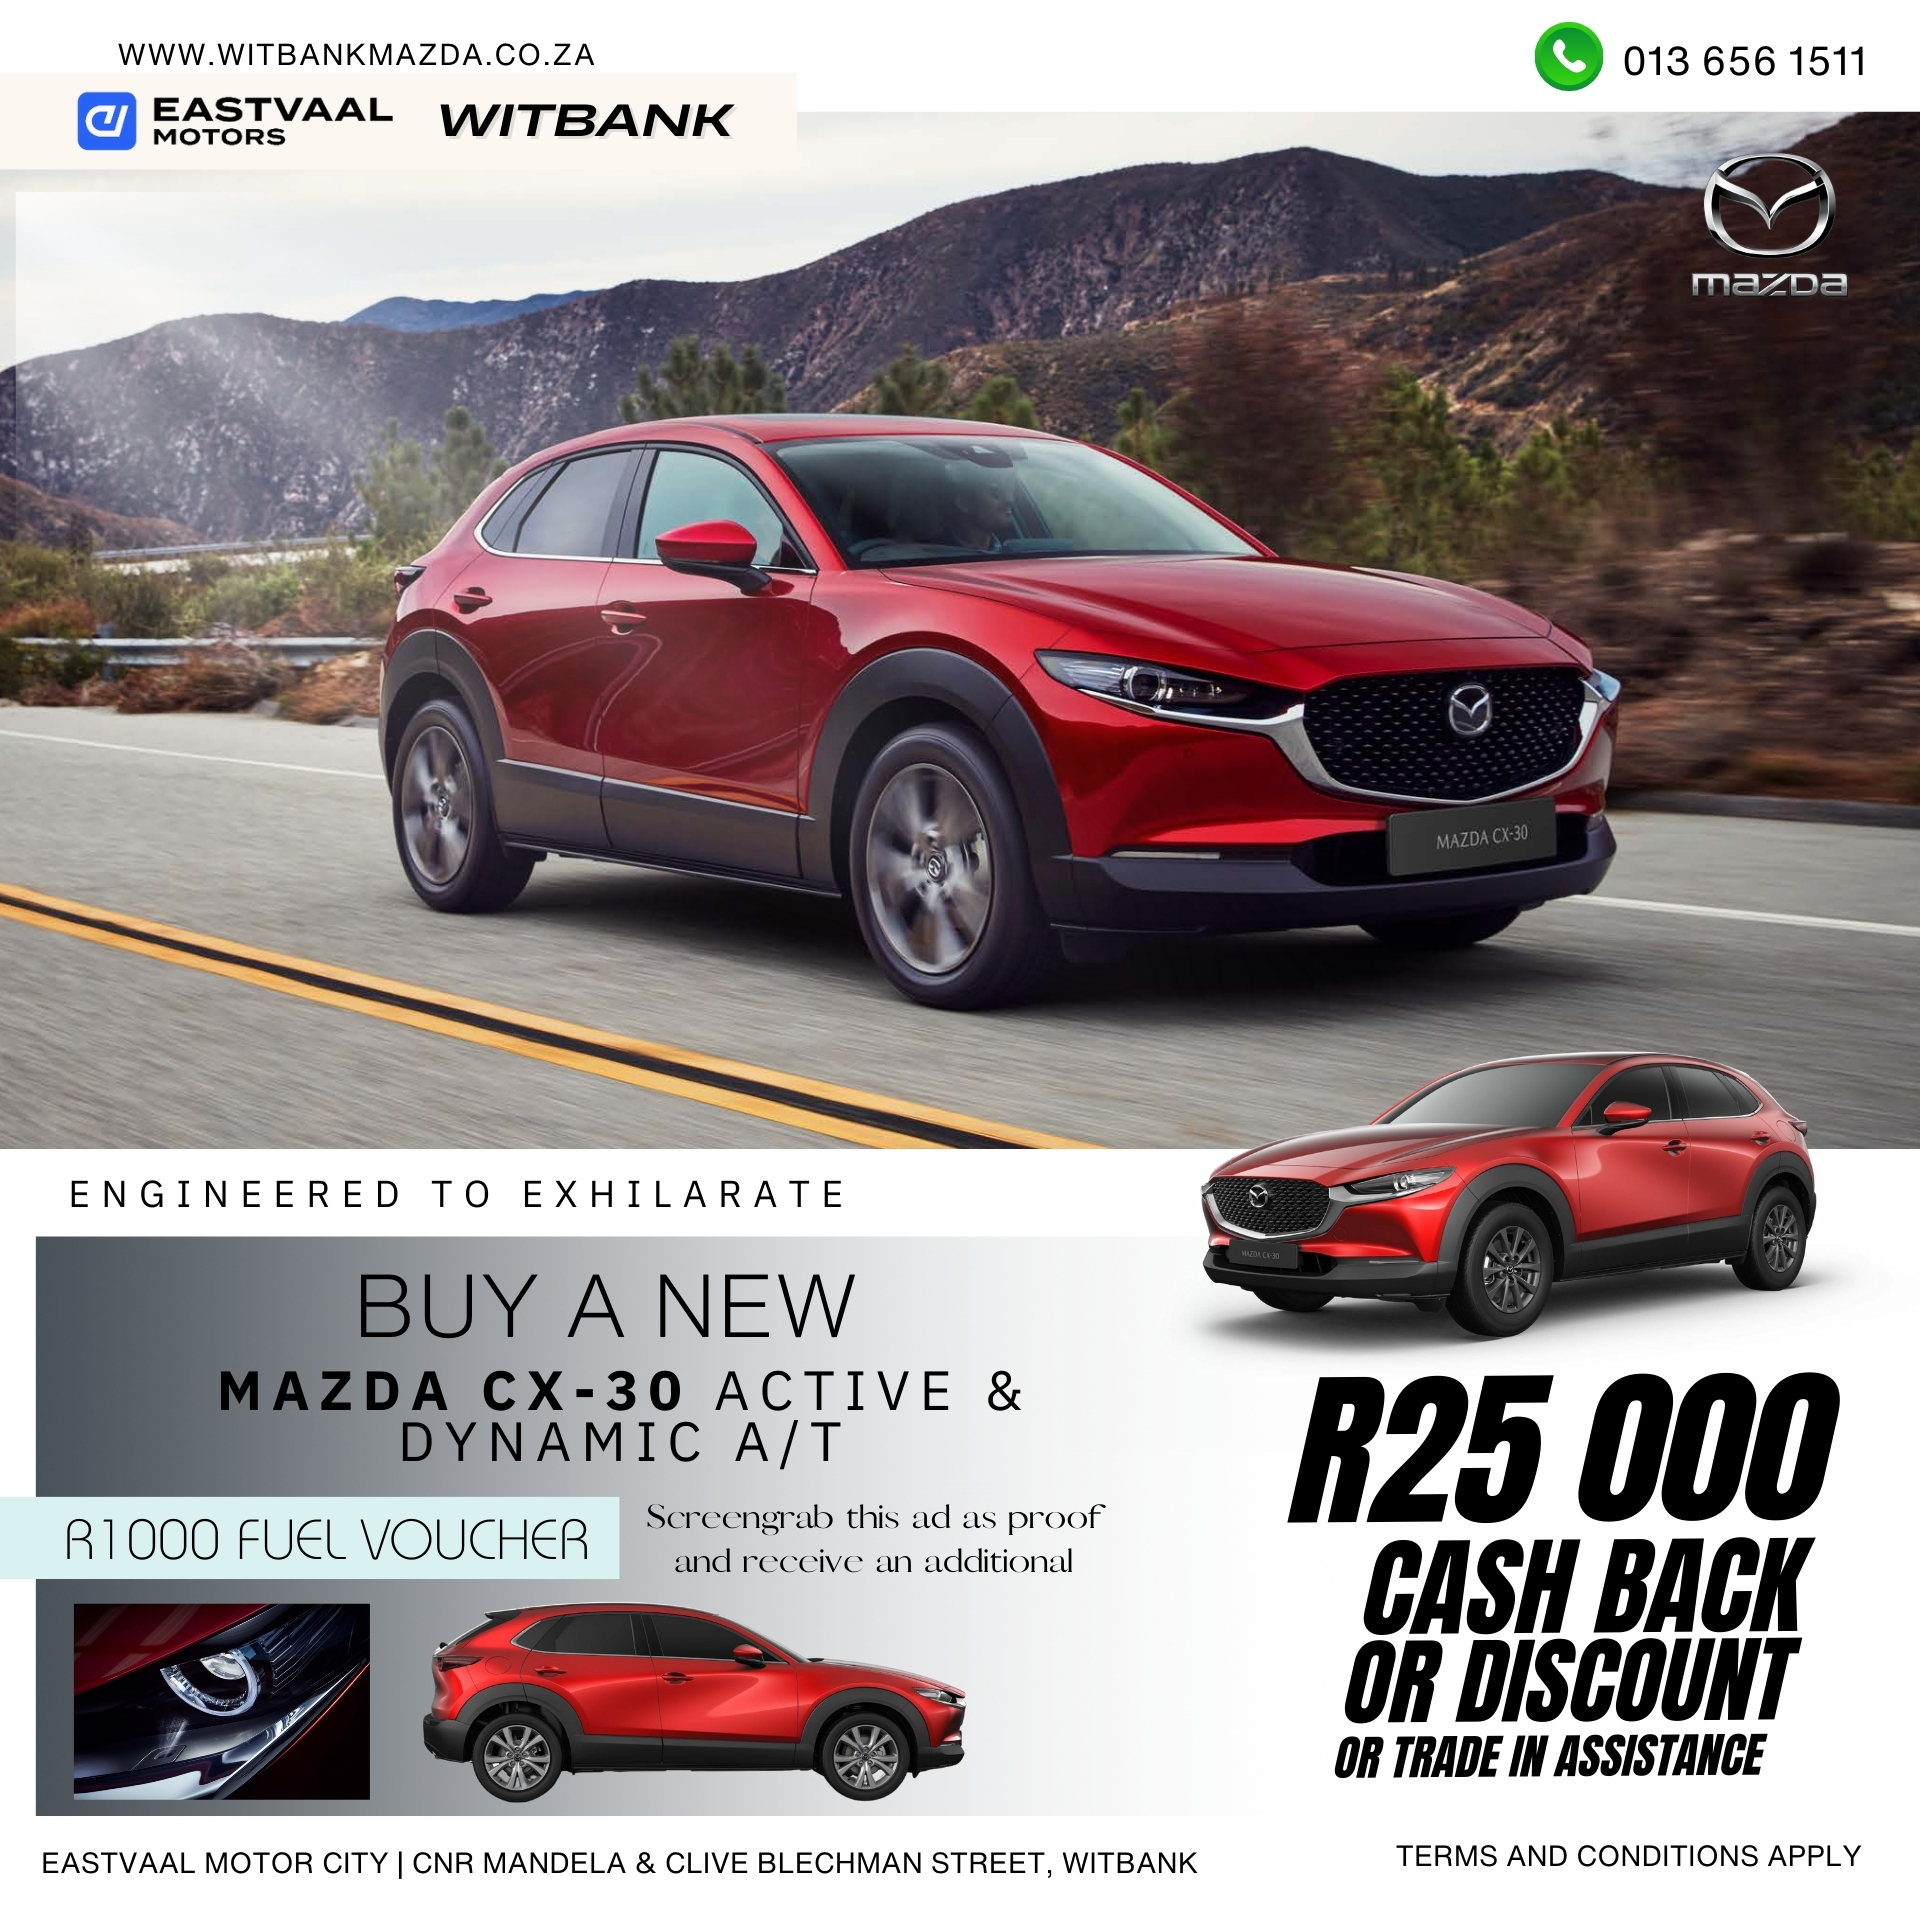 MAZDA CX-30 ACTIVE & DYNAMIC AUTO image from Eastvaal Motors